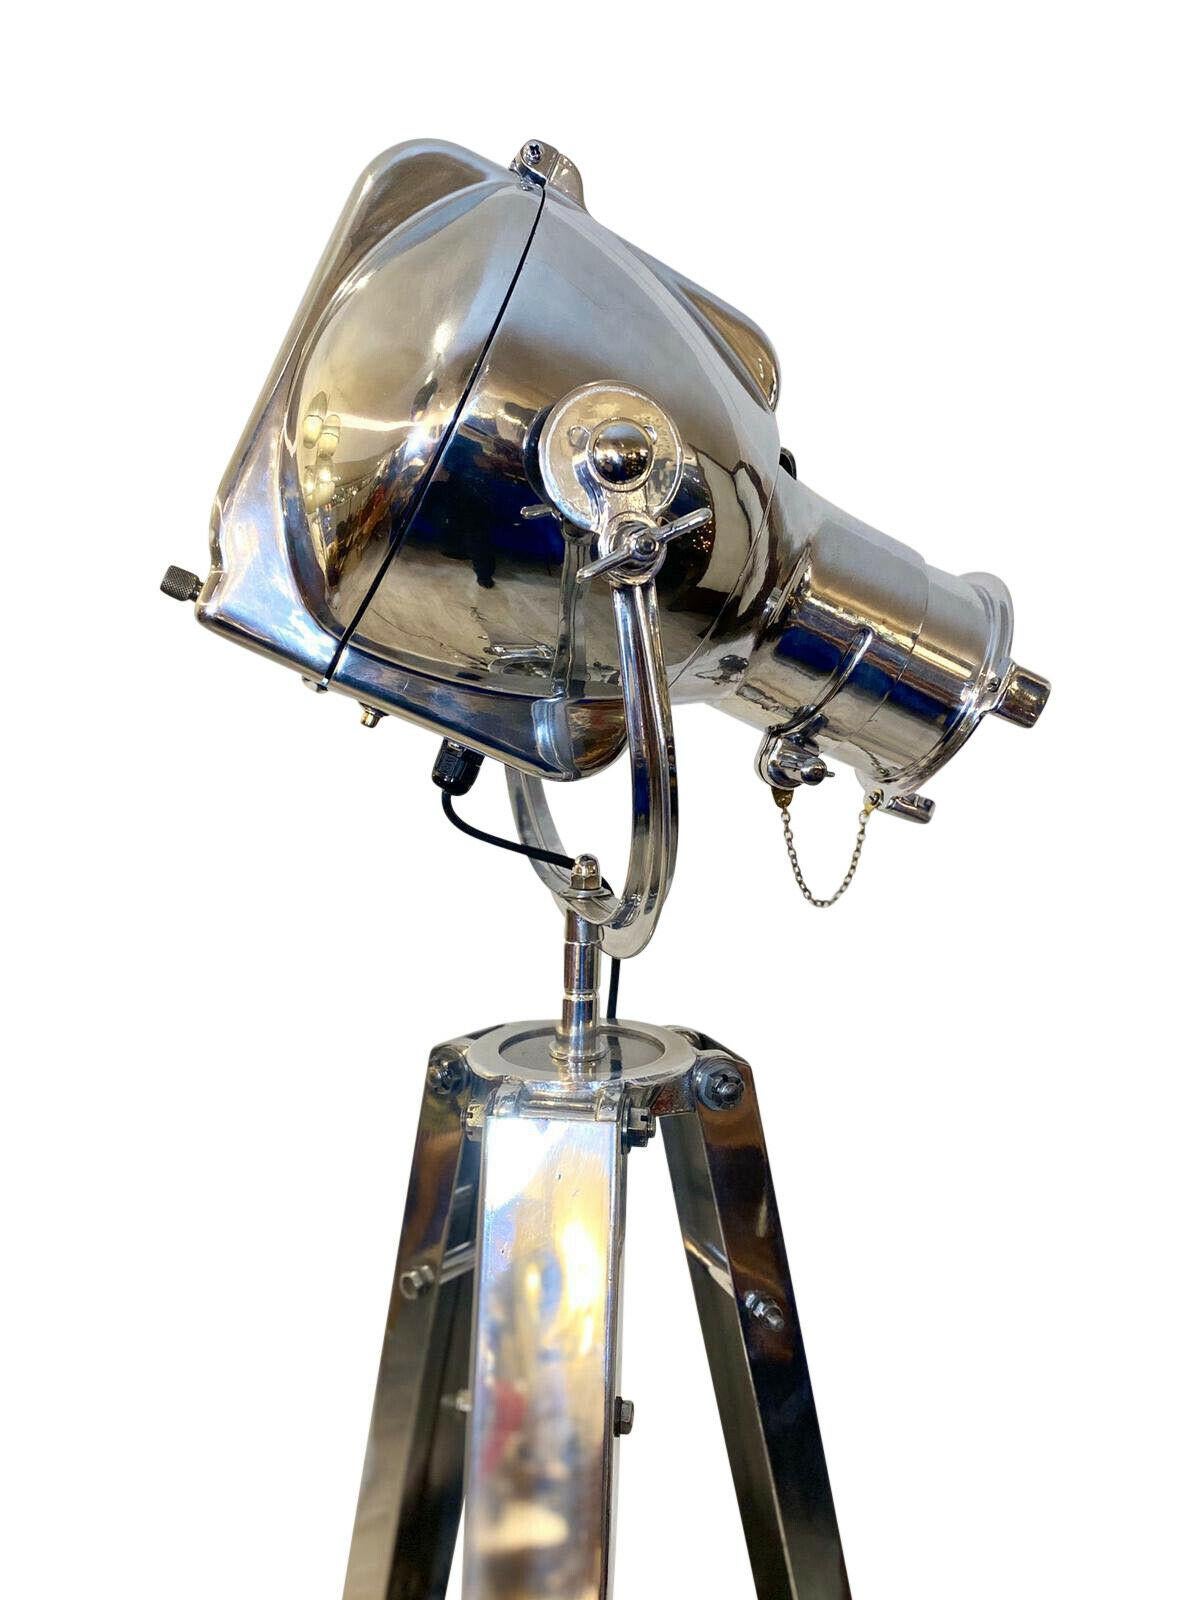 Rare British strand electric theatre lamp set on a WW2 base.

This iconic example of British design was made The Strand Lighting Company in their Covent Garden works in London’s West End.

This strand profile spotlight - also known as the 'Baby